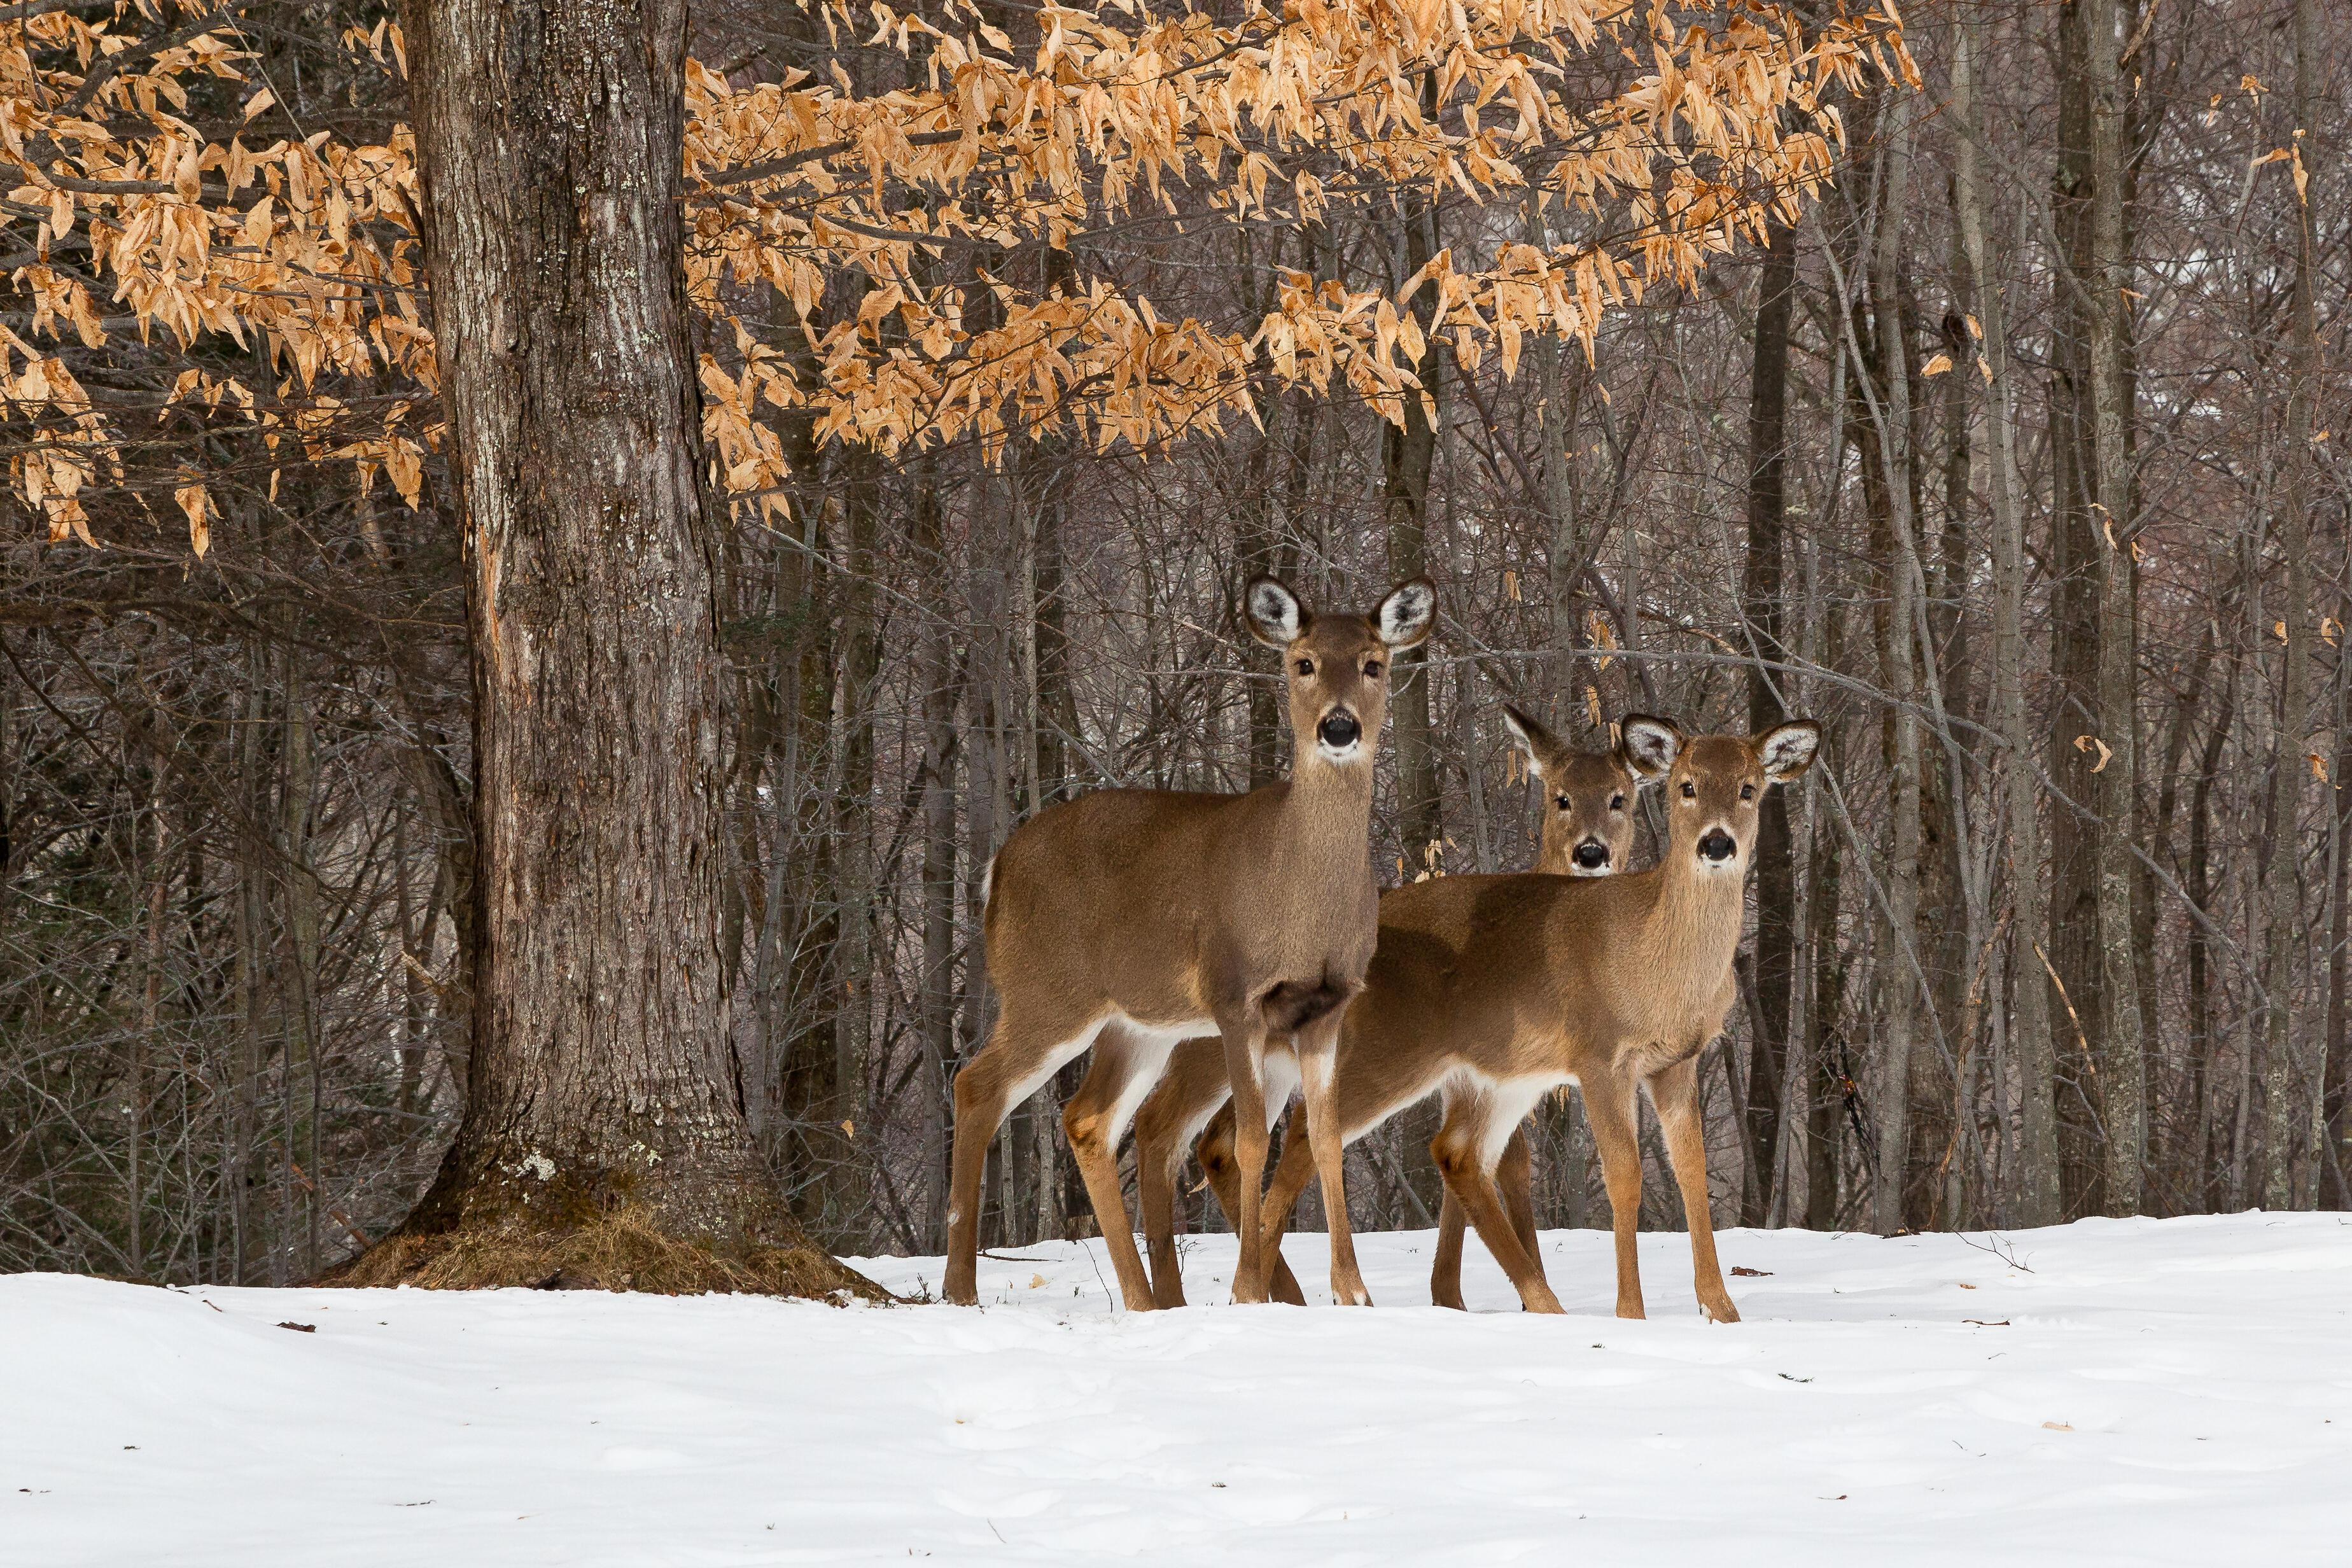 Three deer in a snowy forest.